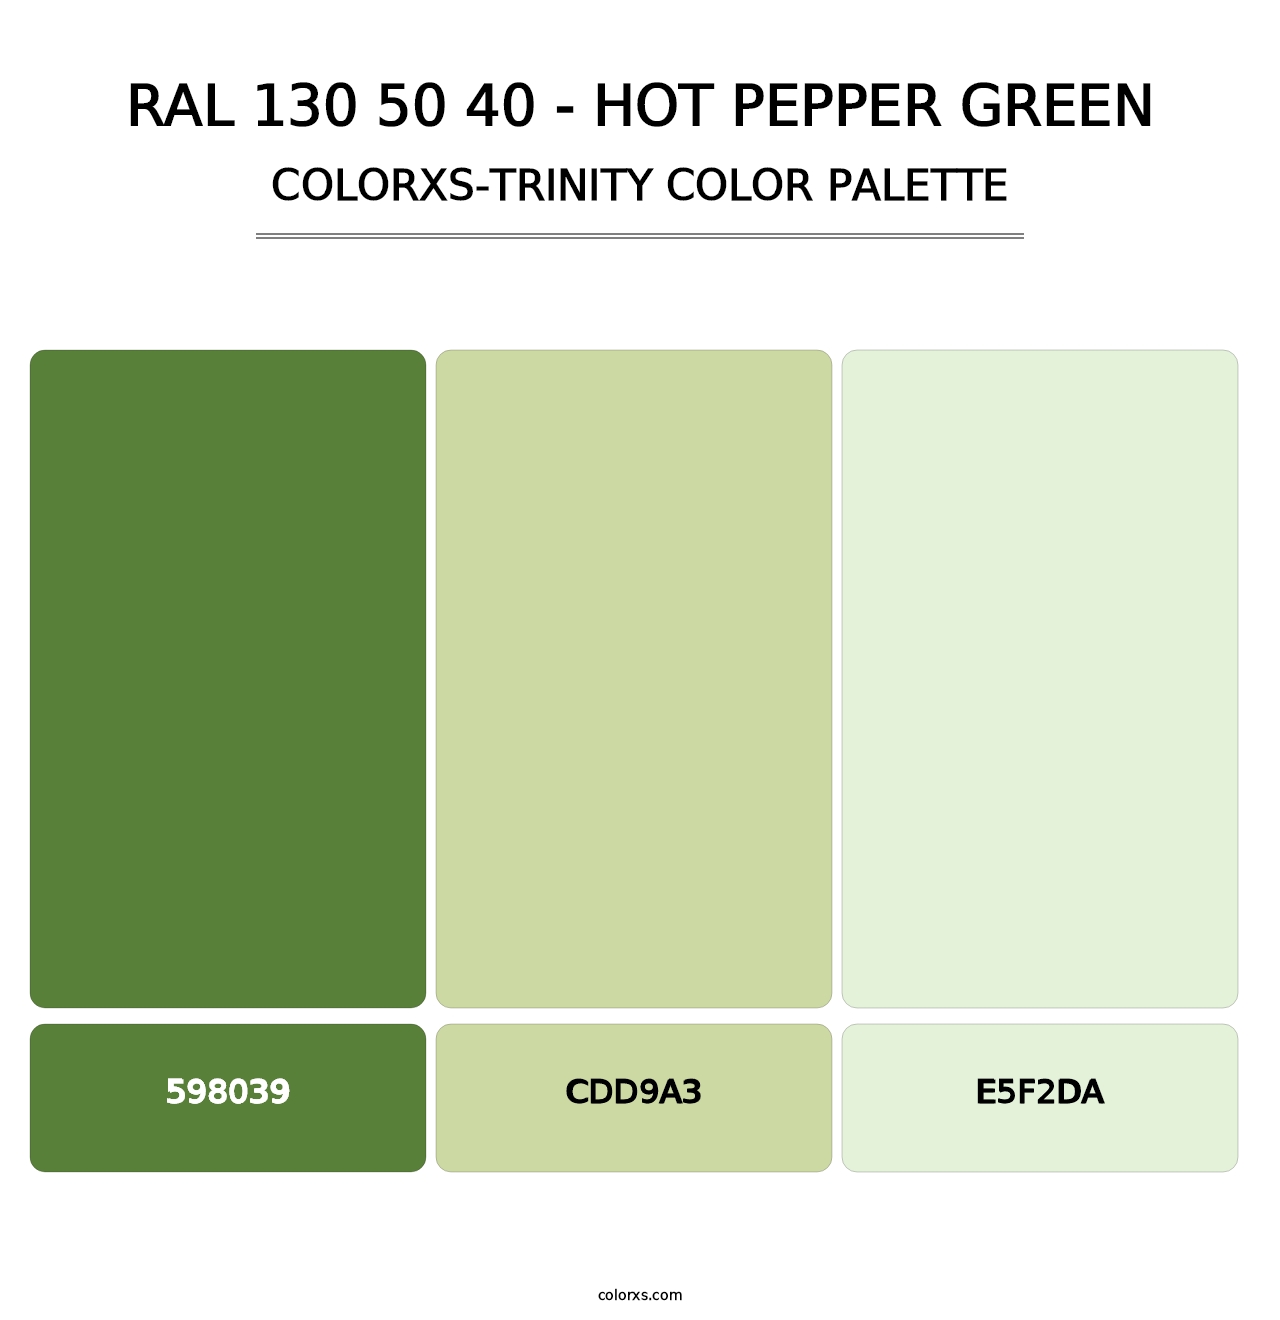 RAL 130 50 40 - Hot Pepper Green - Colorxs Trinity Palette